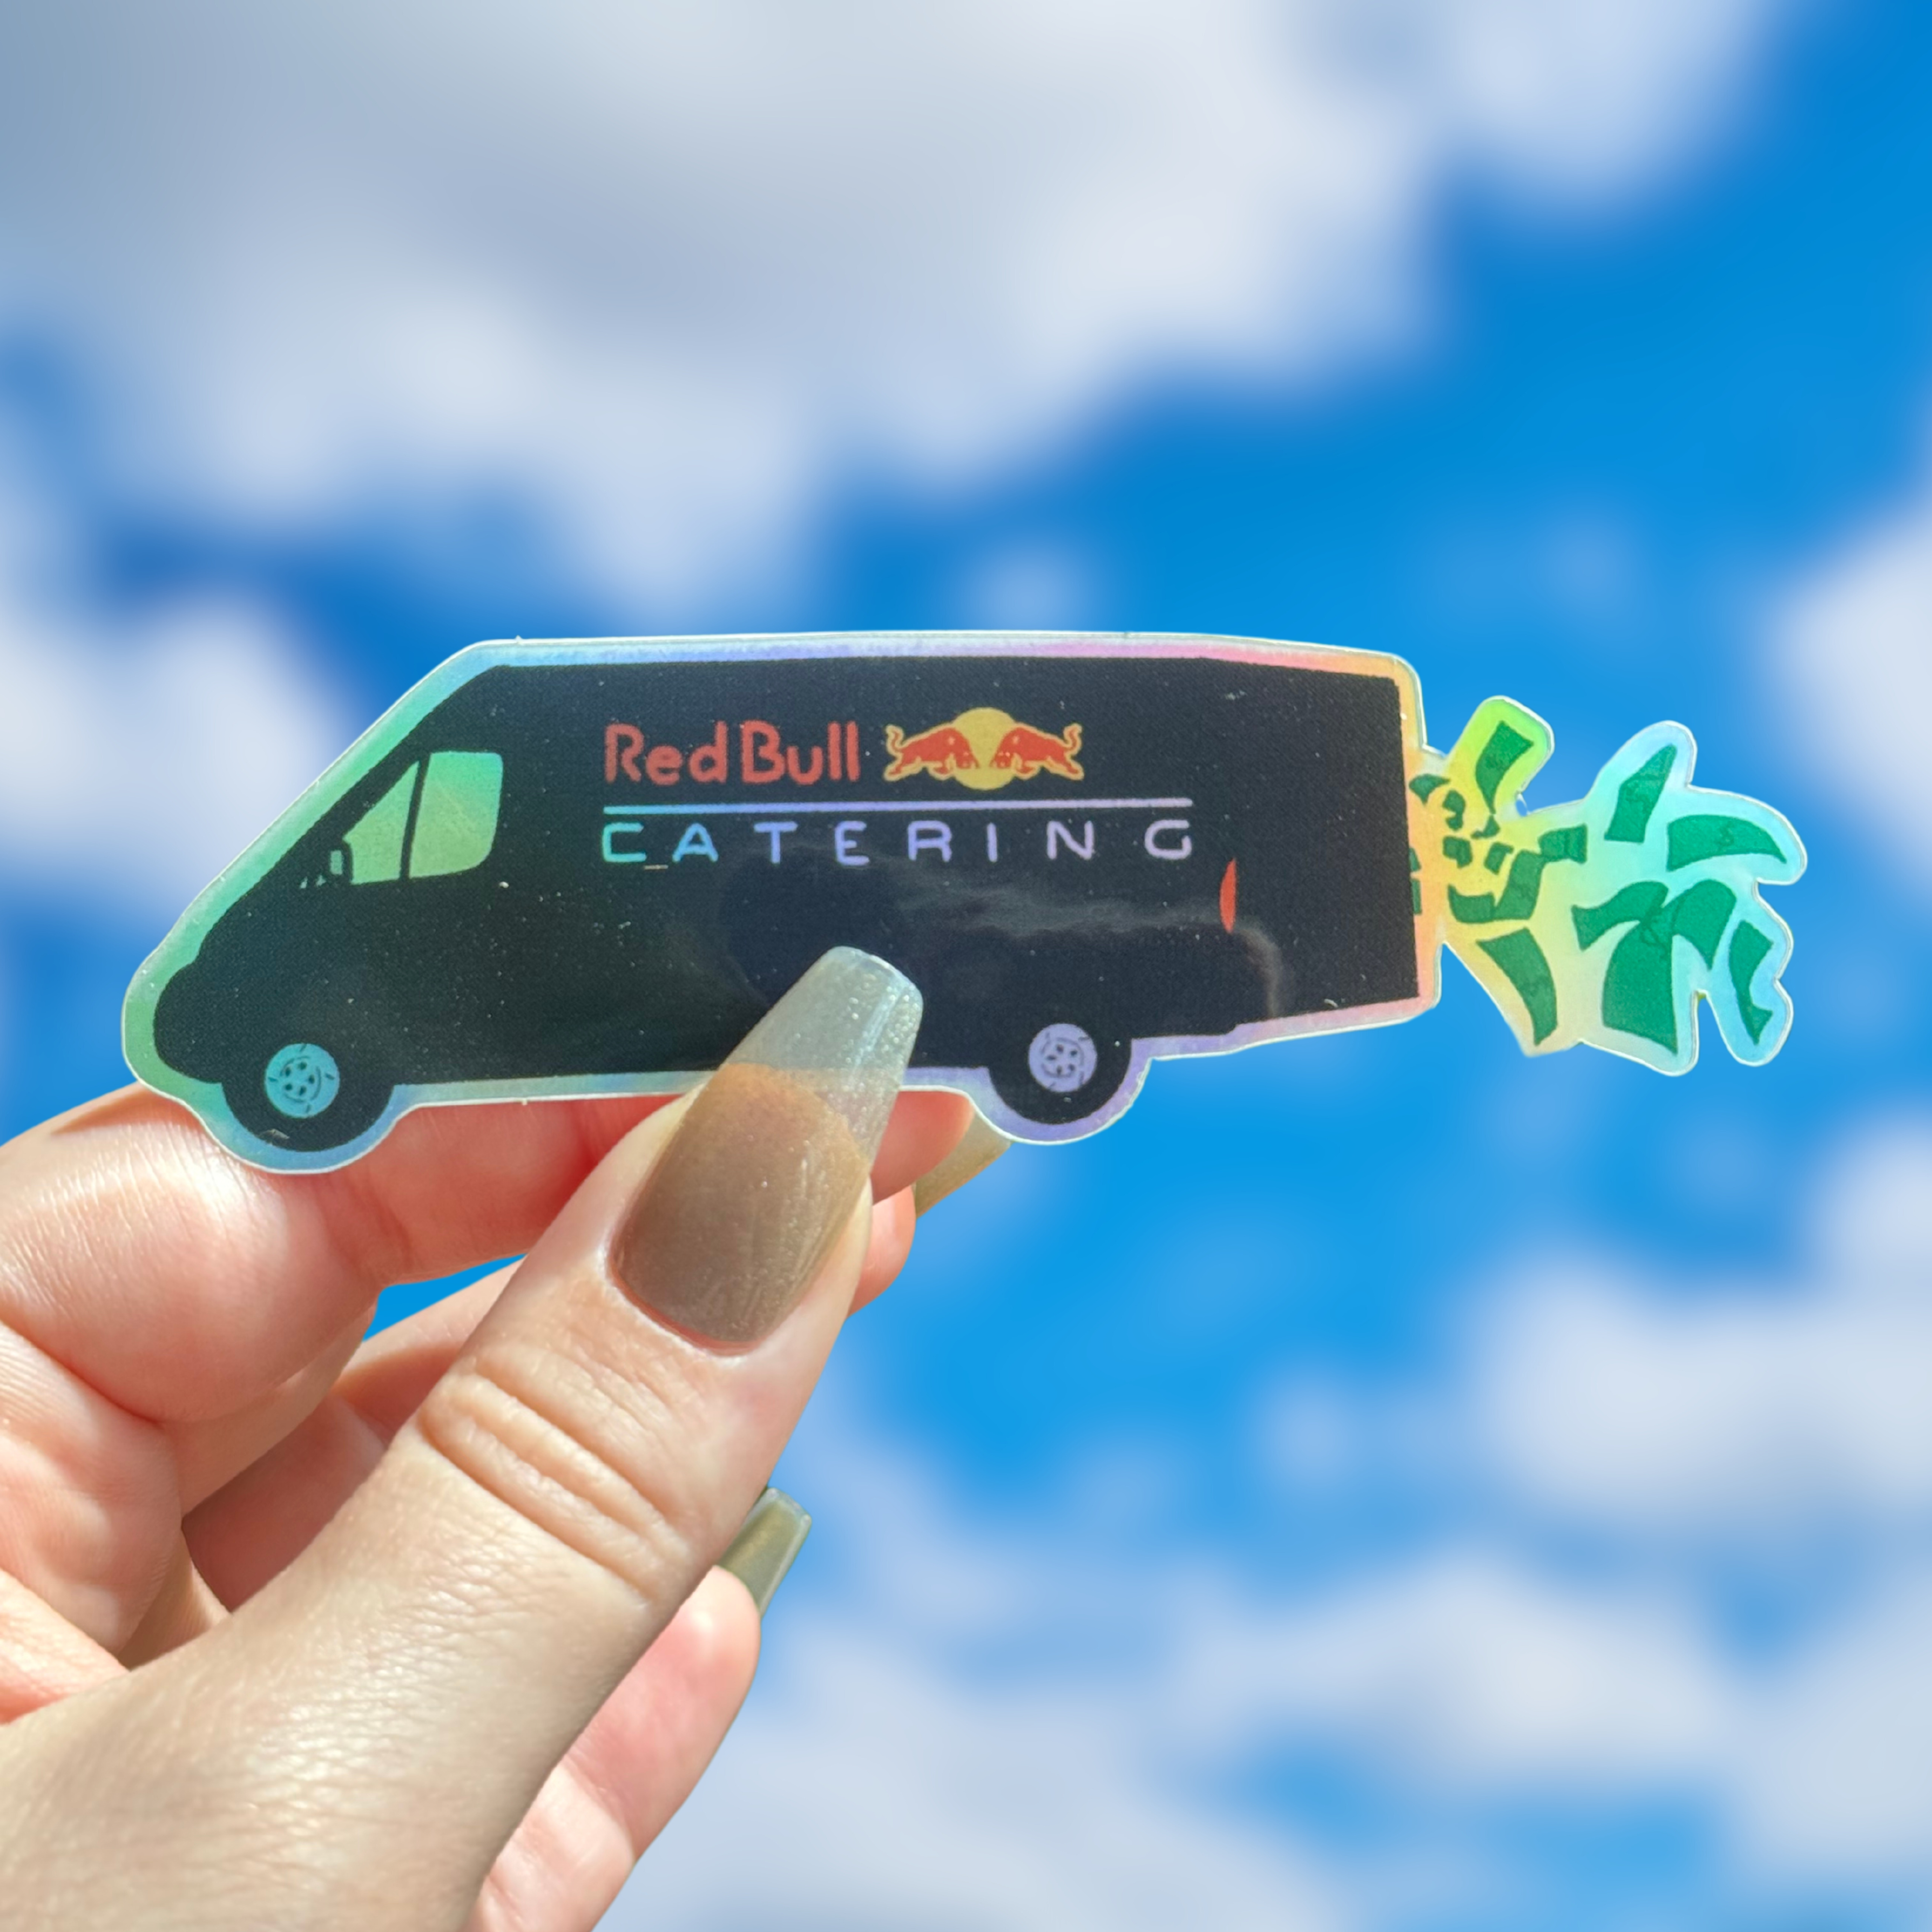 Red Bull Catering sticker